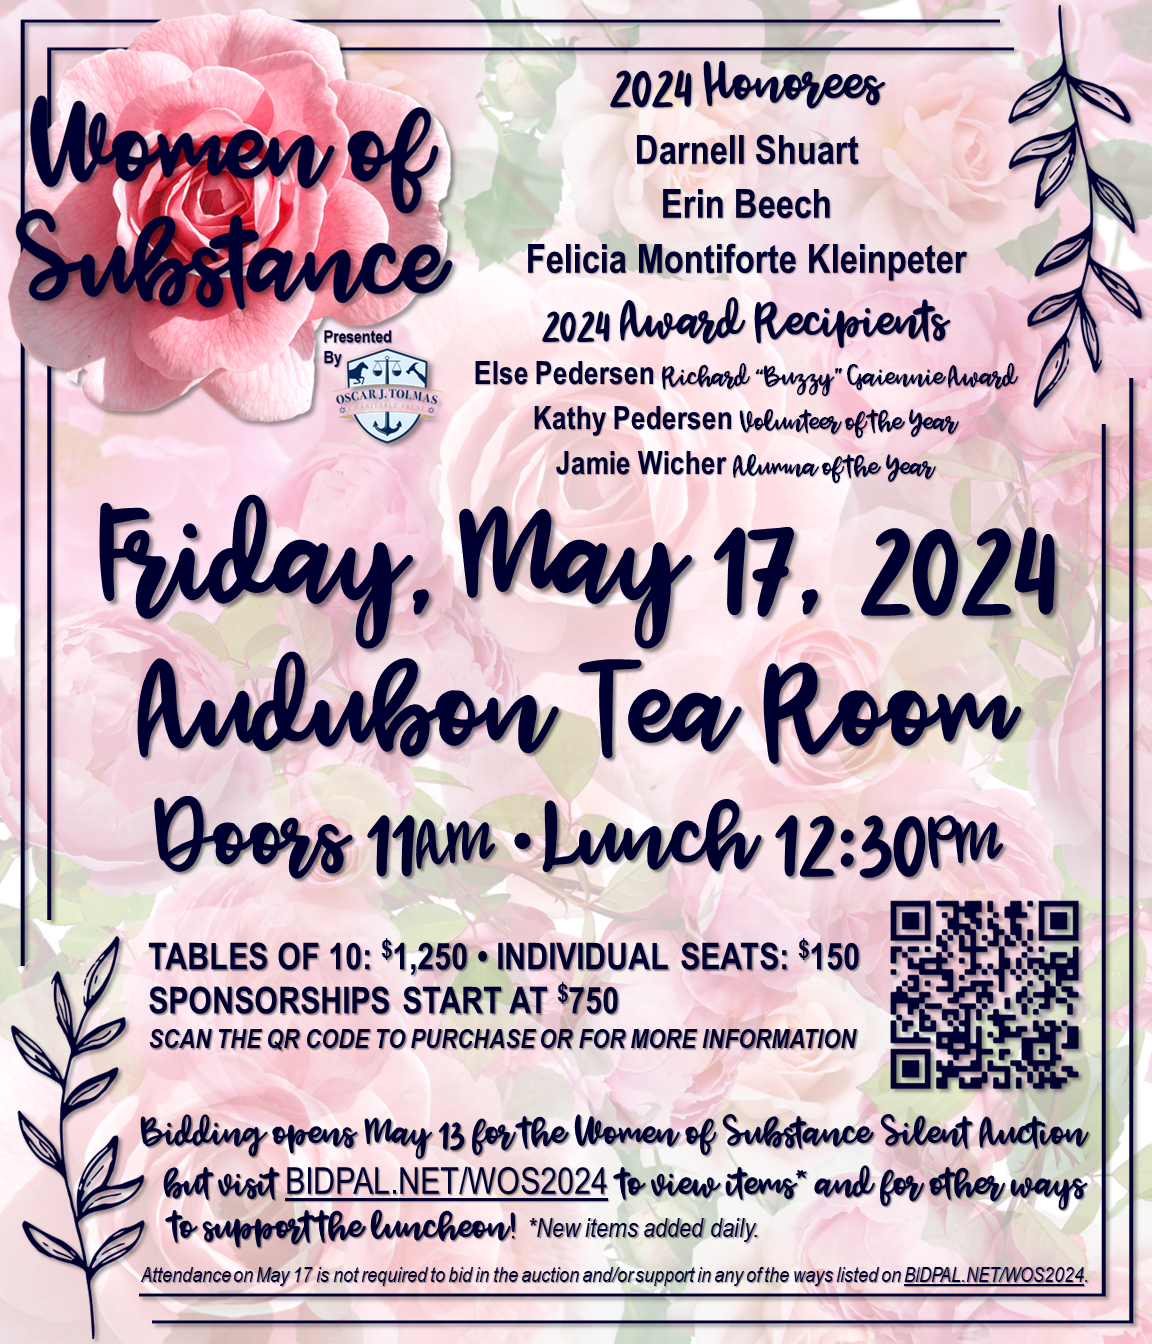 Join us on May 17th to celebrate Women of Substance!  We're thrilled to announce that our Founder and CEO, Felicia Monteforte Kleinpeter, will be speaking and honored as one of the exceptional women of 2024. Don't miss this empowering event!  2024 Honorees Darnell Shuart Erin Beech Felicia Montiforte Kleinpeter 2024 Award Recipients Else Pedersen Richard "Buzzy" Gaiennie Award Kathy Pedersen Volunteer of the Year Jamie Wicher Aluma of the Year Friday, May 17. 2024 Audubon Tea Room Doors 11am • Lunch 12:30 pm TABLES OF 10: $1,250 • INDIVIDUAL SEATS: $150 SPONSORSHIPS START AT $750 SCAN THE QR CODE TO PURCHASE OR FOR MORE INFORMATION